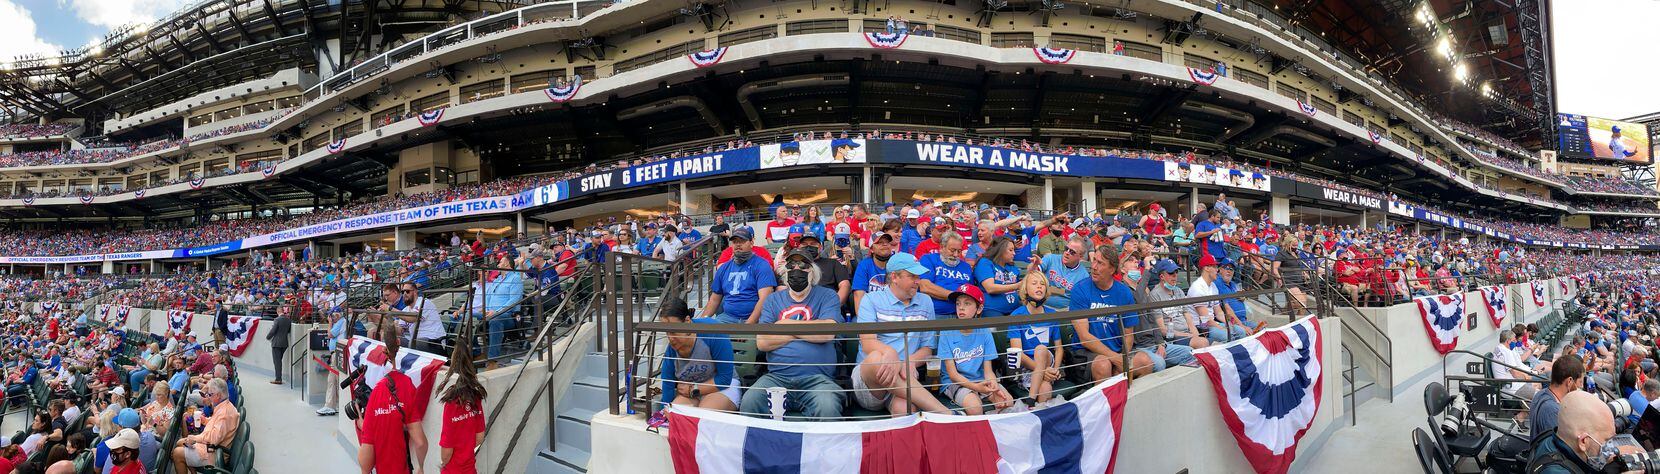 In a panoramic view, the The Texas Rangers baseball team reminded a nearly sold-out crowd to practice COVID-19 protocols during Opening Day at Globe Life Field in Arlington, Monday, April 5, 2021. The Texas Rangers were facing the Toronto Blue Jays in their home opener. The Rangers lost, 6-4. (Tom Fox/The Dallas Morning News)